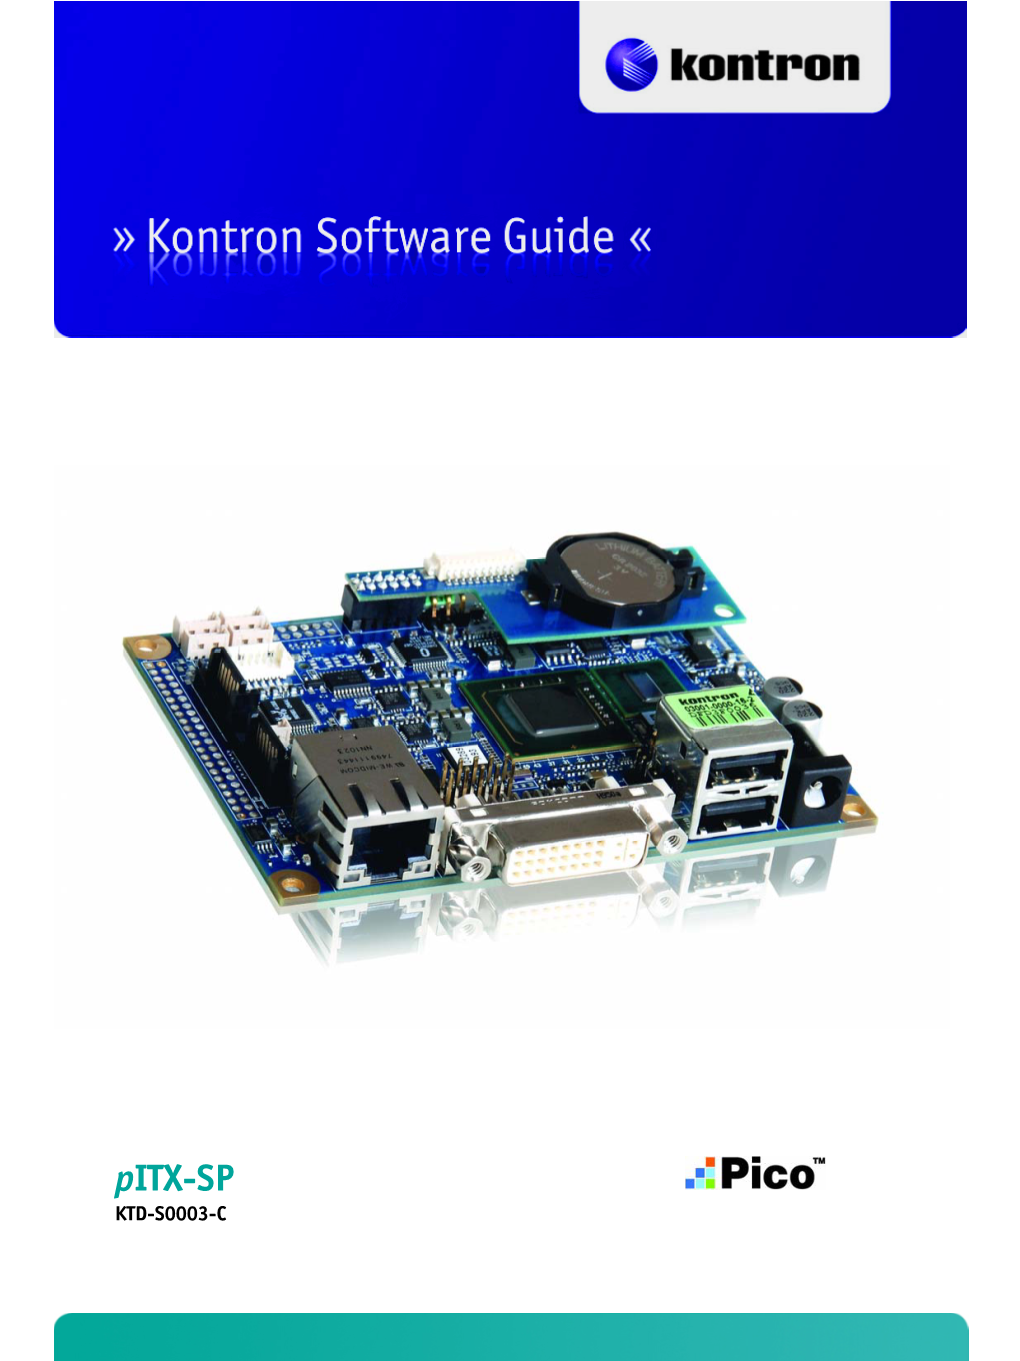 Pitx-SP Software Guide User Information Table of Contents